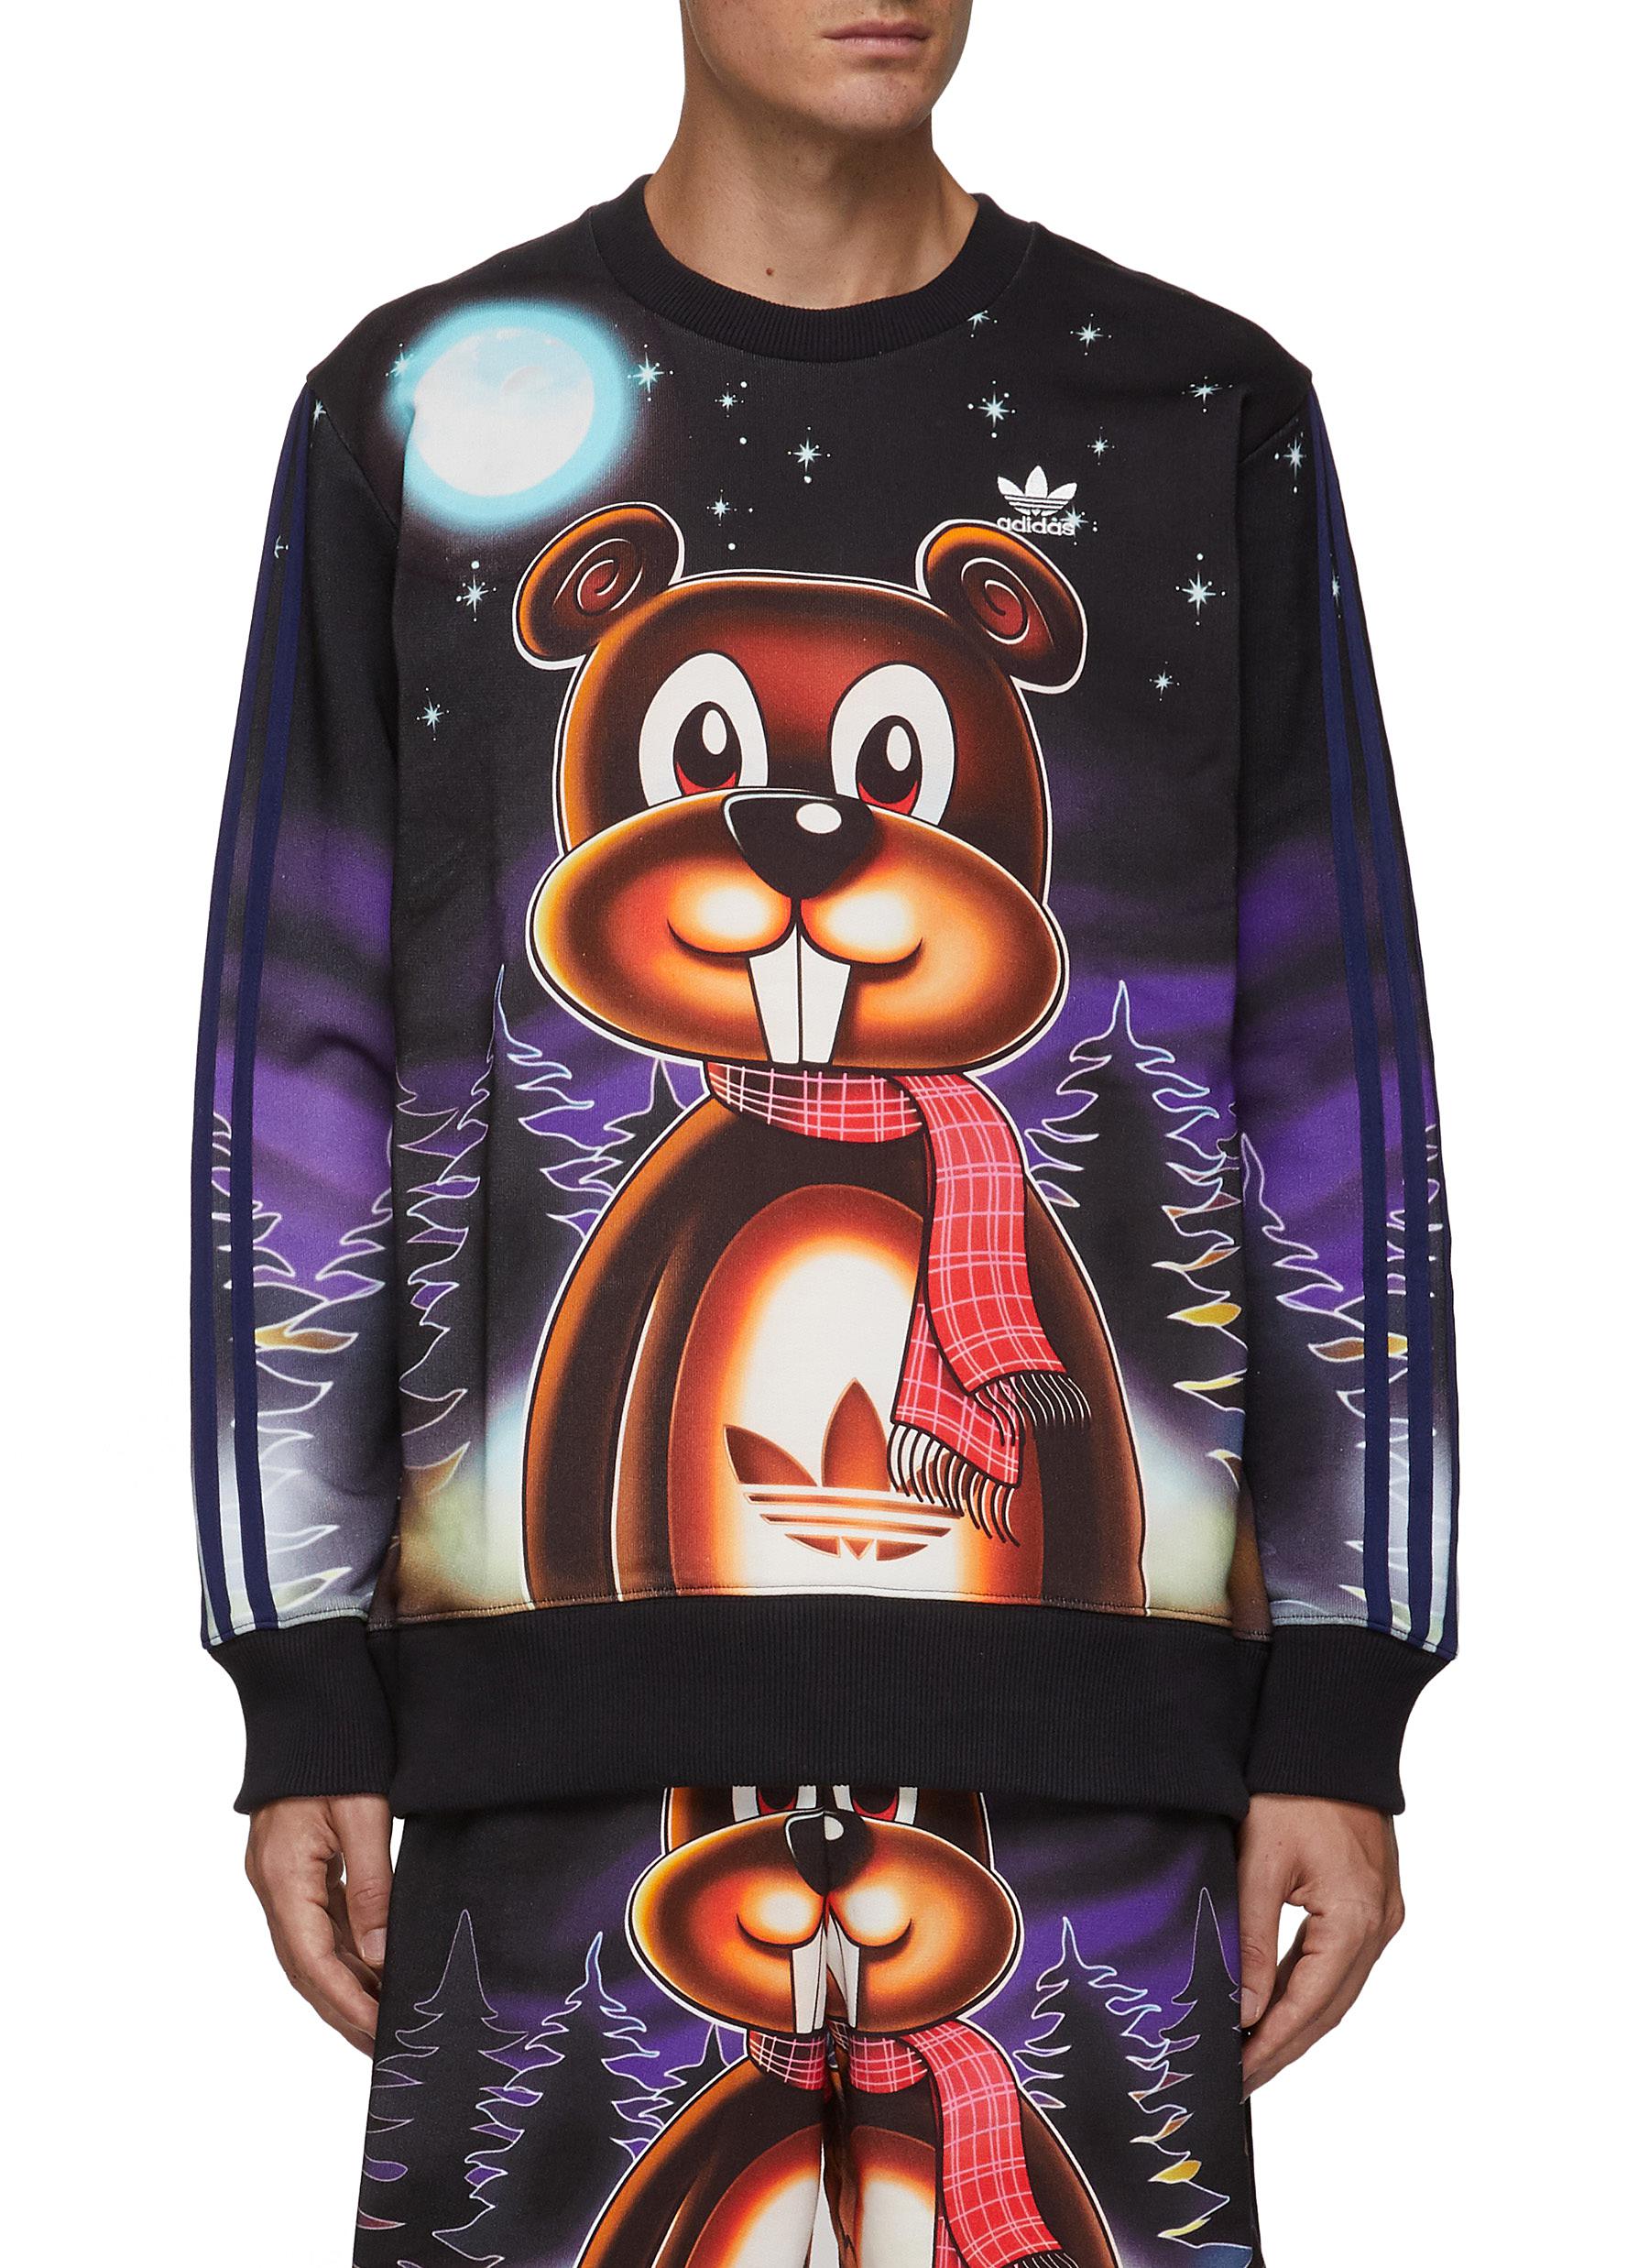 ADIDAS X KERWIN FROST SQUIRREL AOP THERMAL LONG SLEEVES T-SHIRT